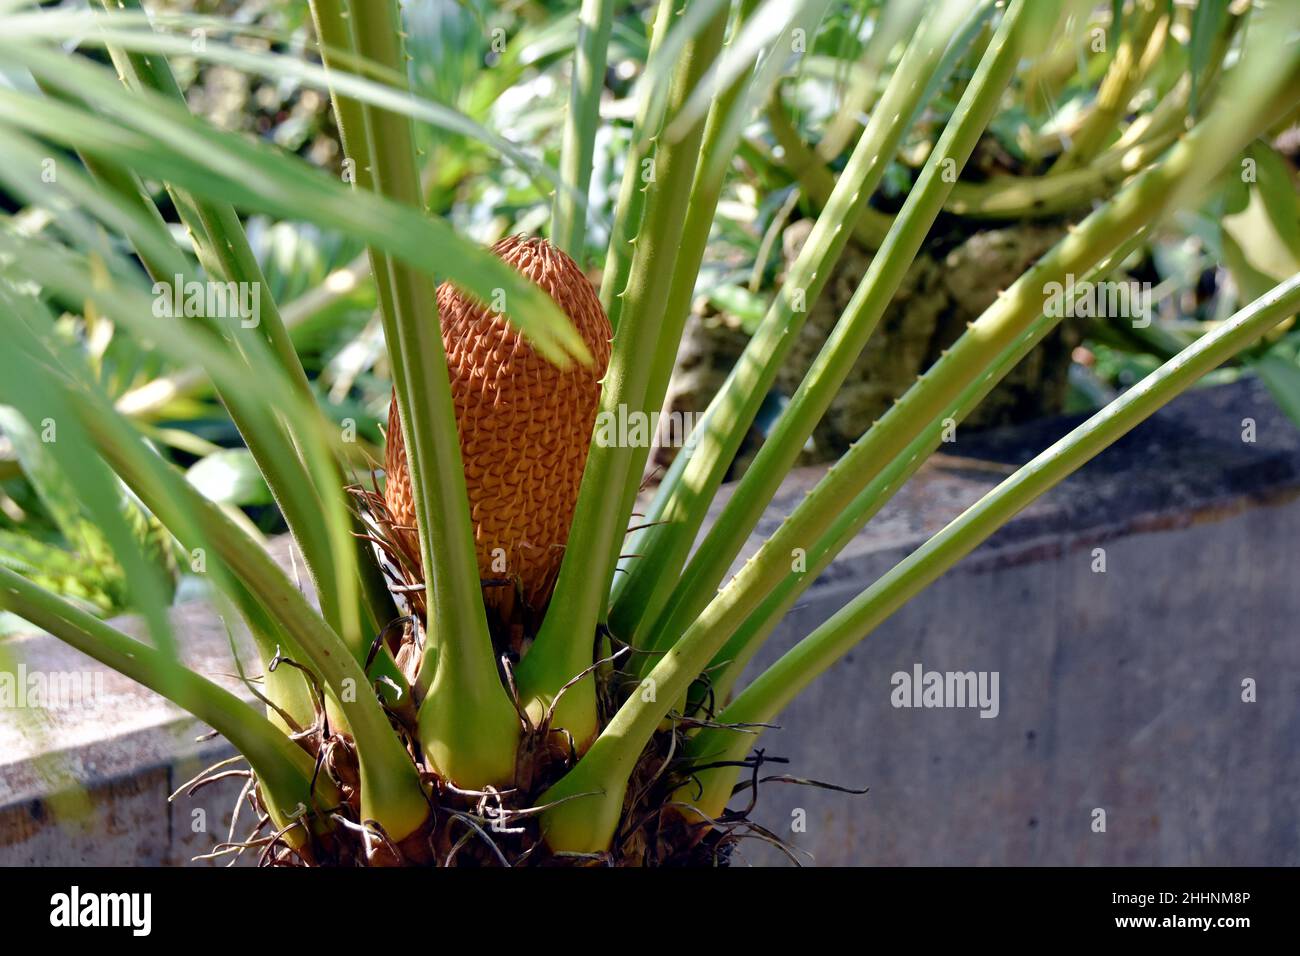 A male cone of ancient genus of trees Cycas circinalis with the green leaf crown appearing to arise directly from the ground. Stock Photo